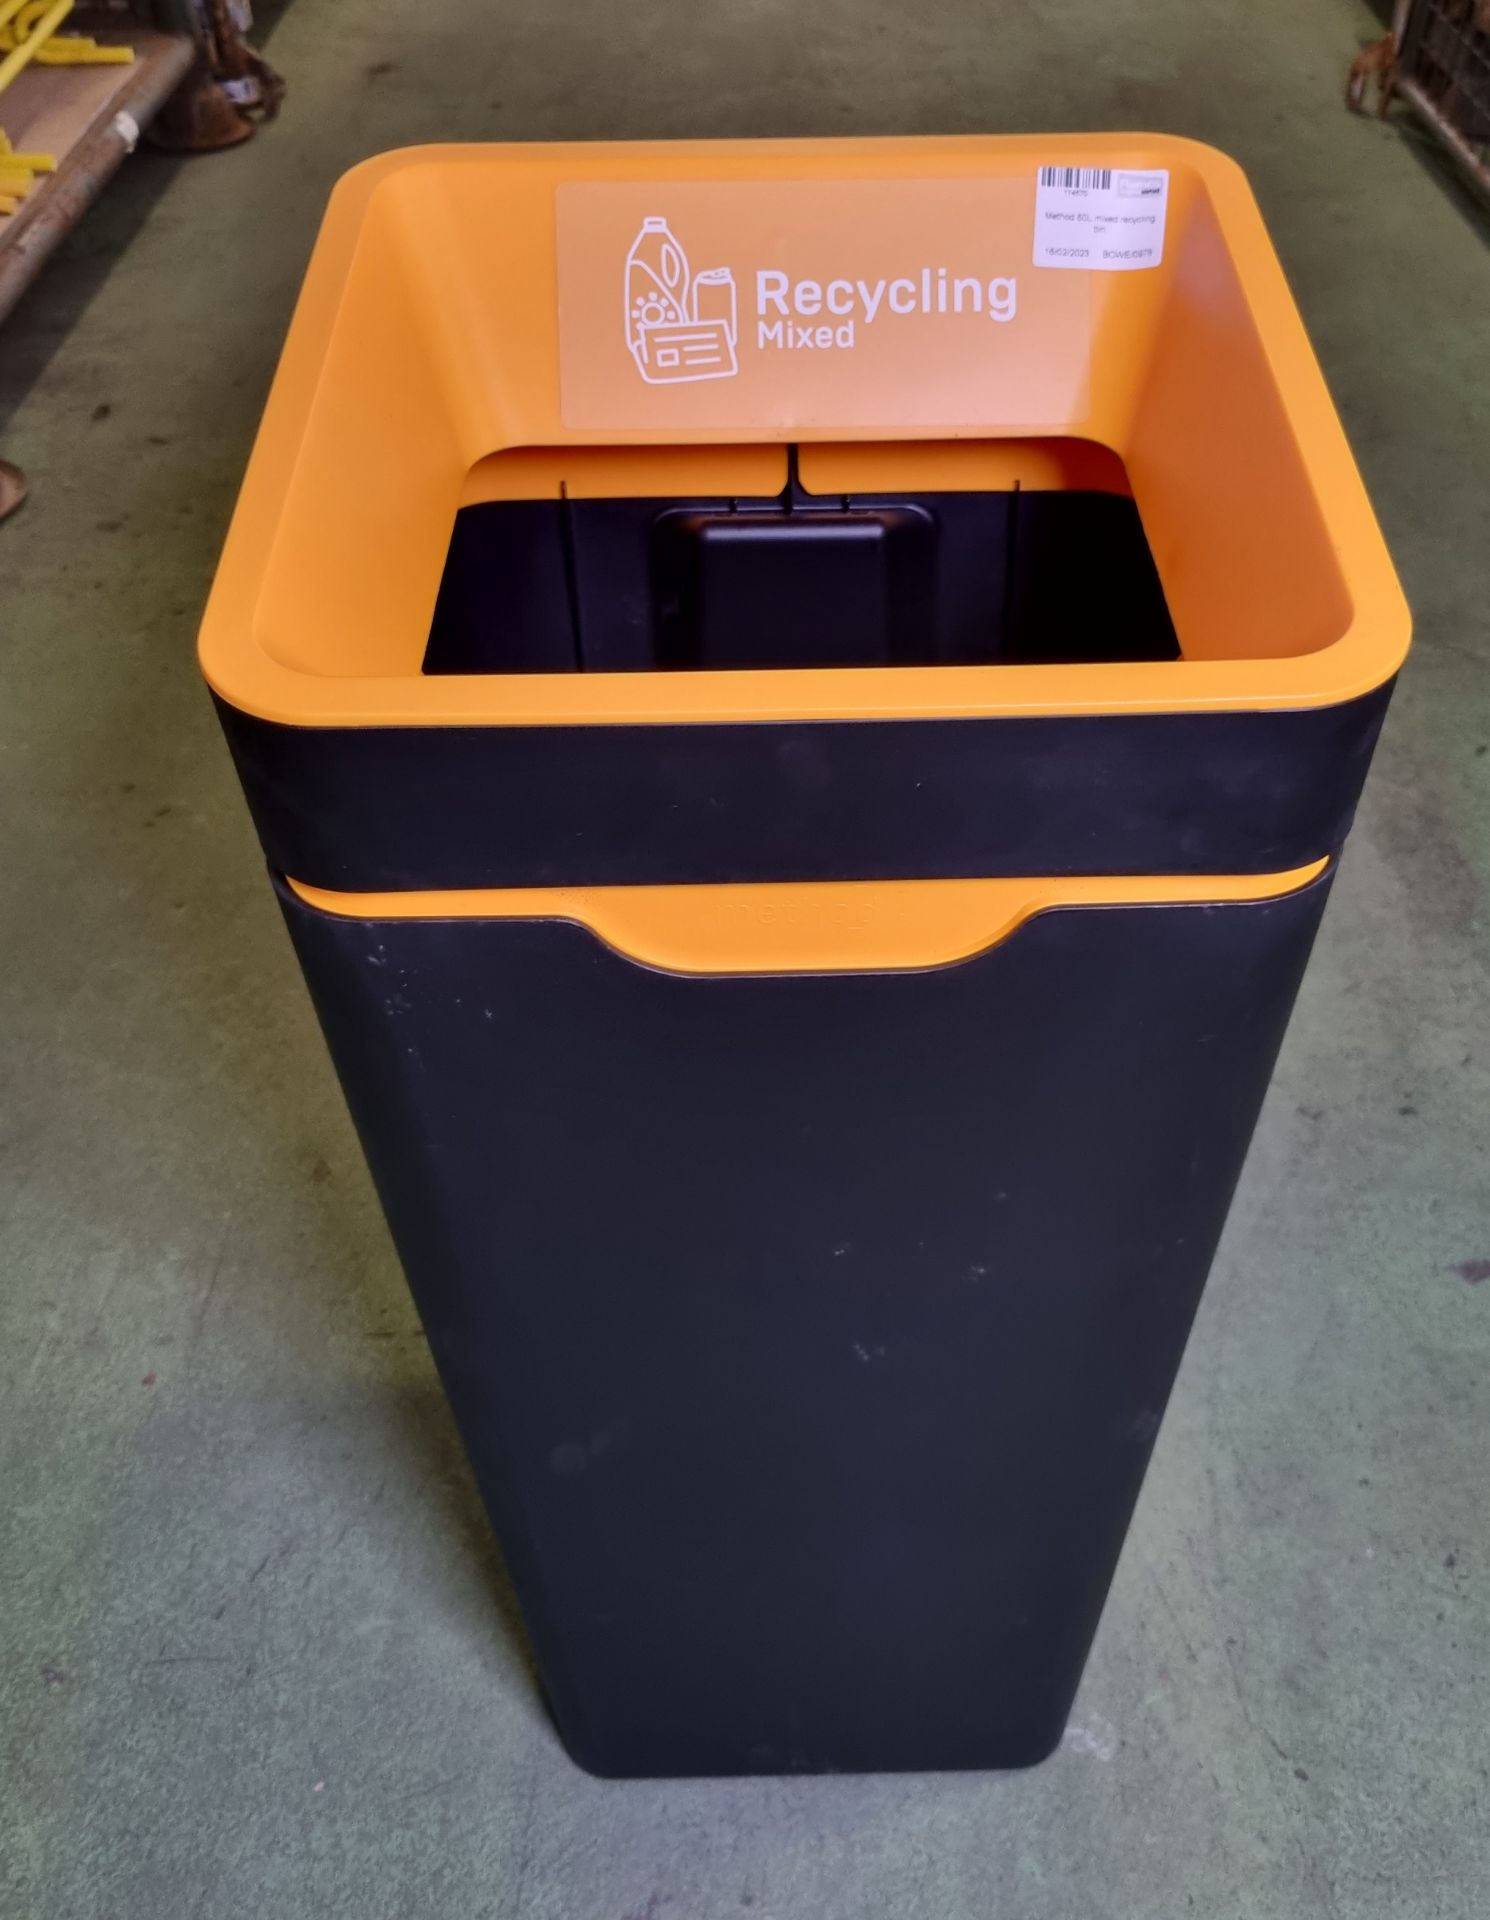 6x Method 60L mixed recycling bins - Image 2 of 3